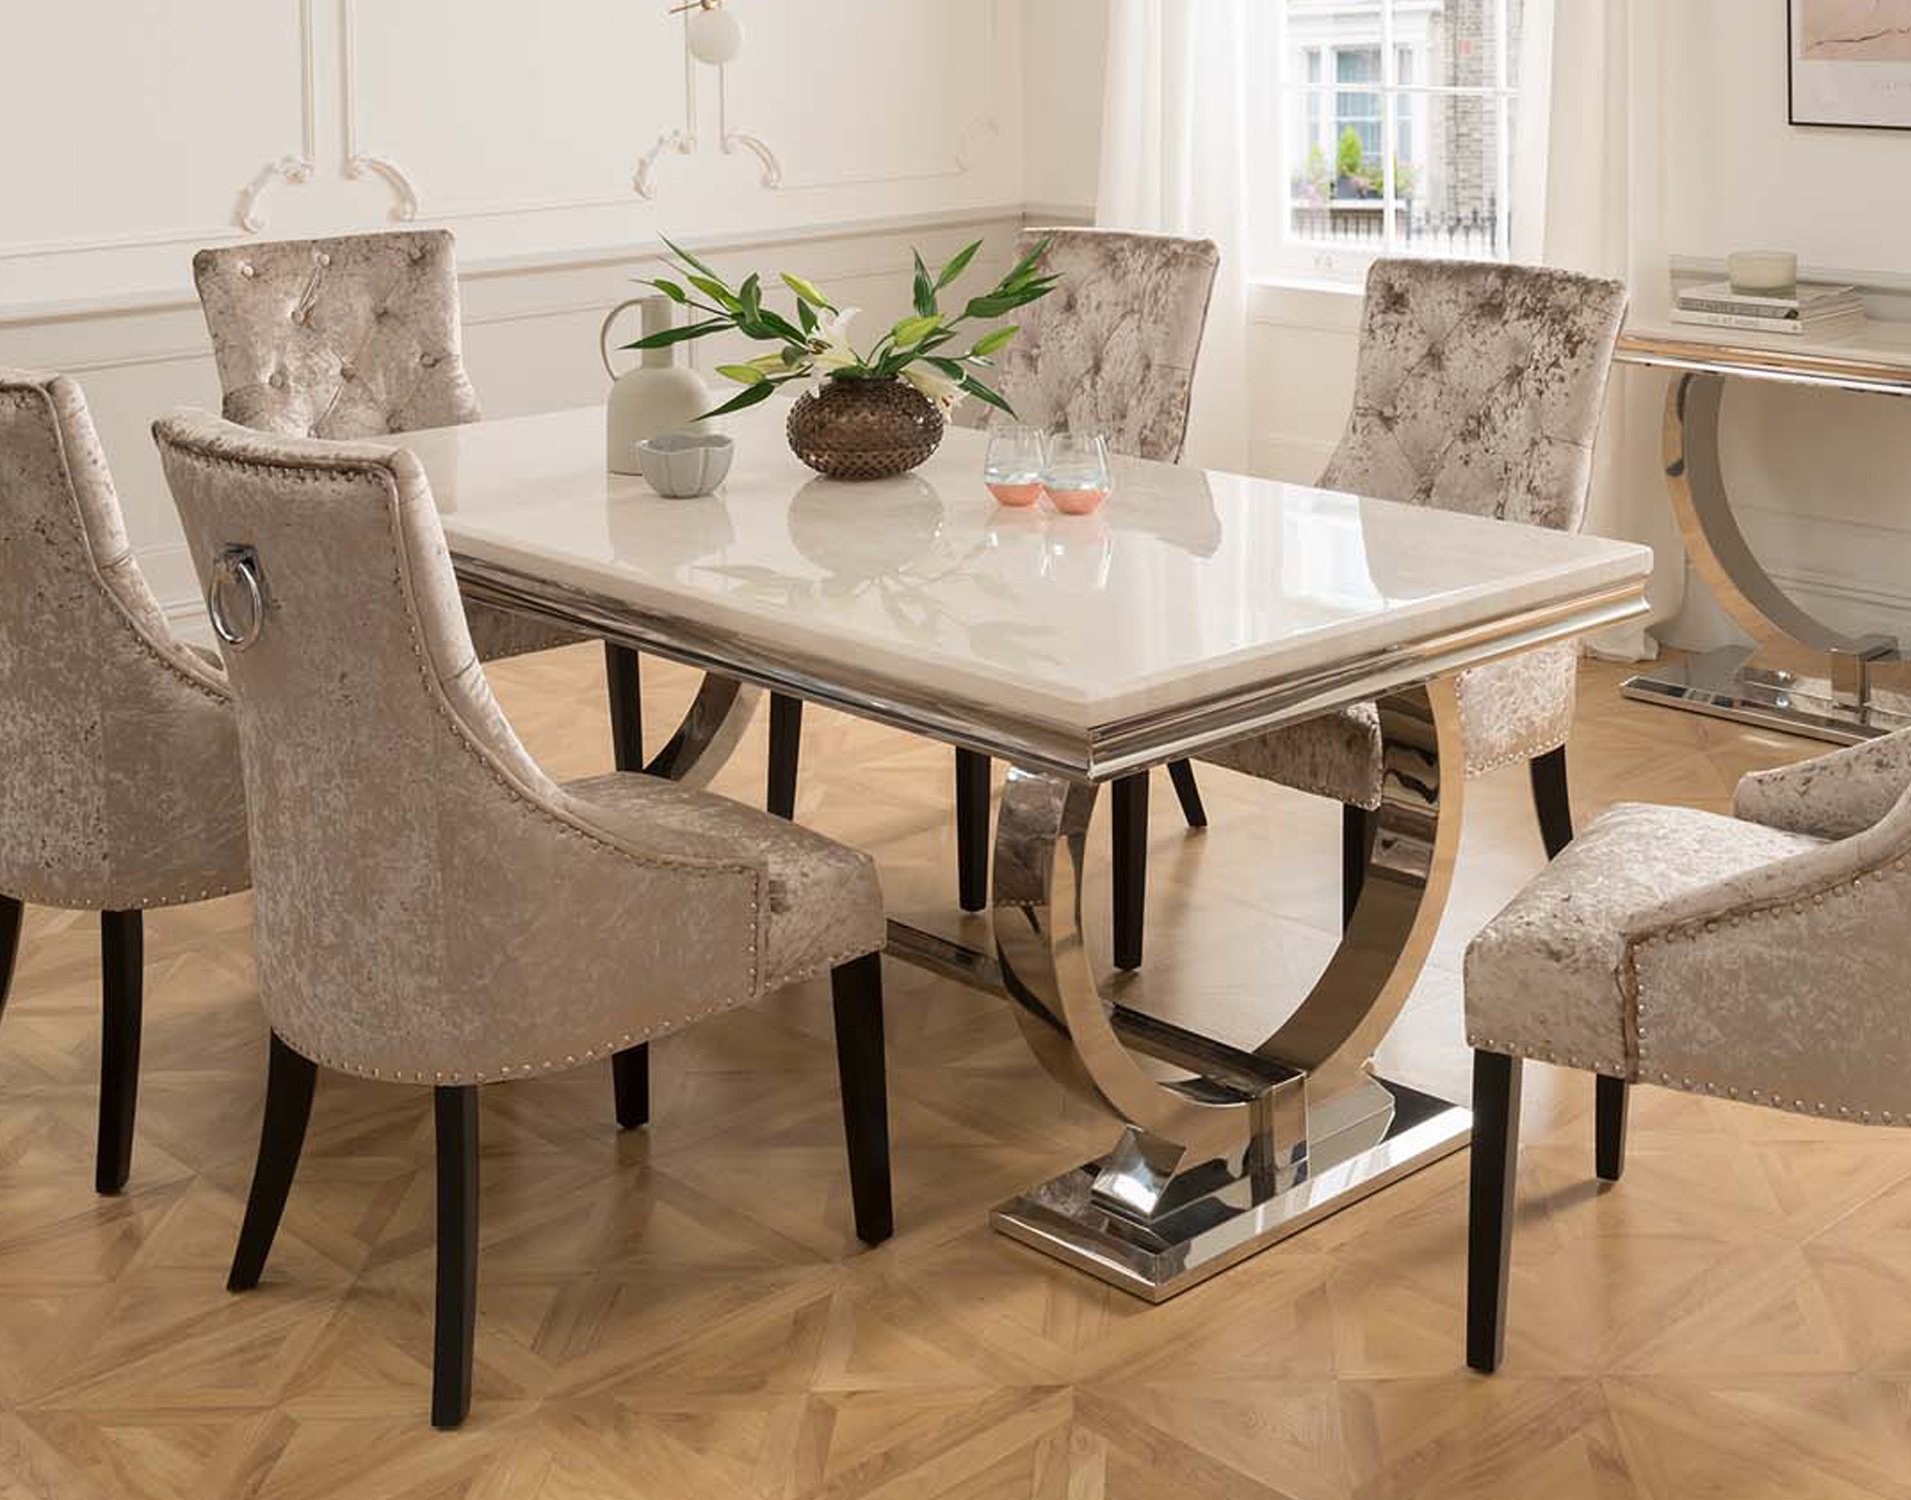 Cream Colored Dining Room Table And Chairs